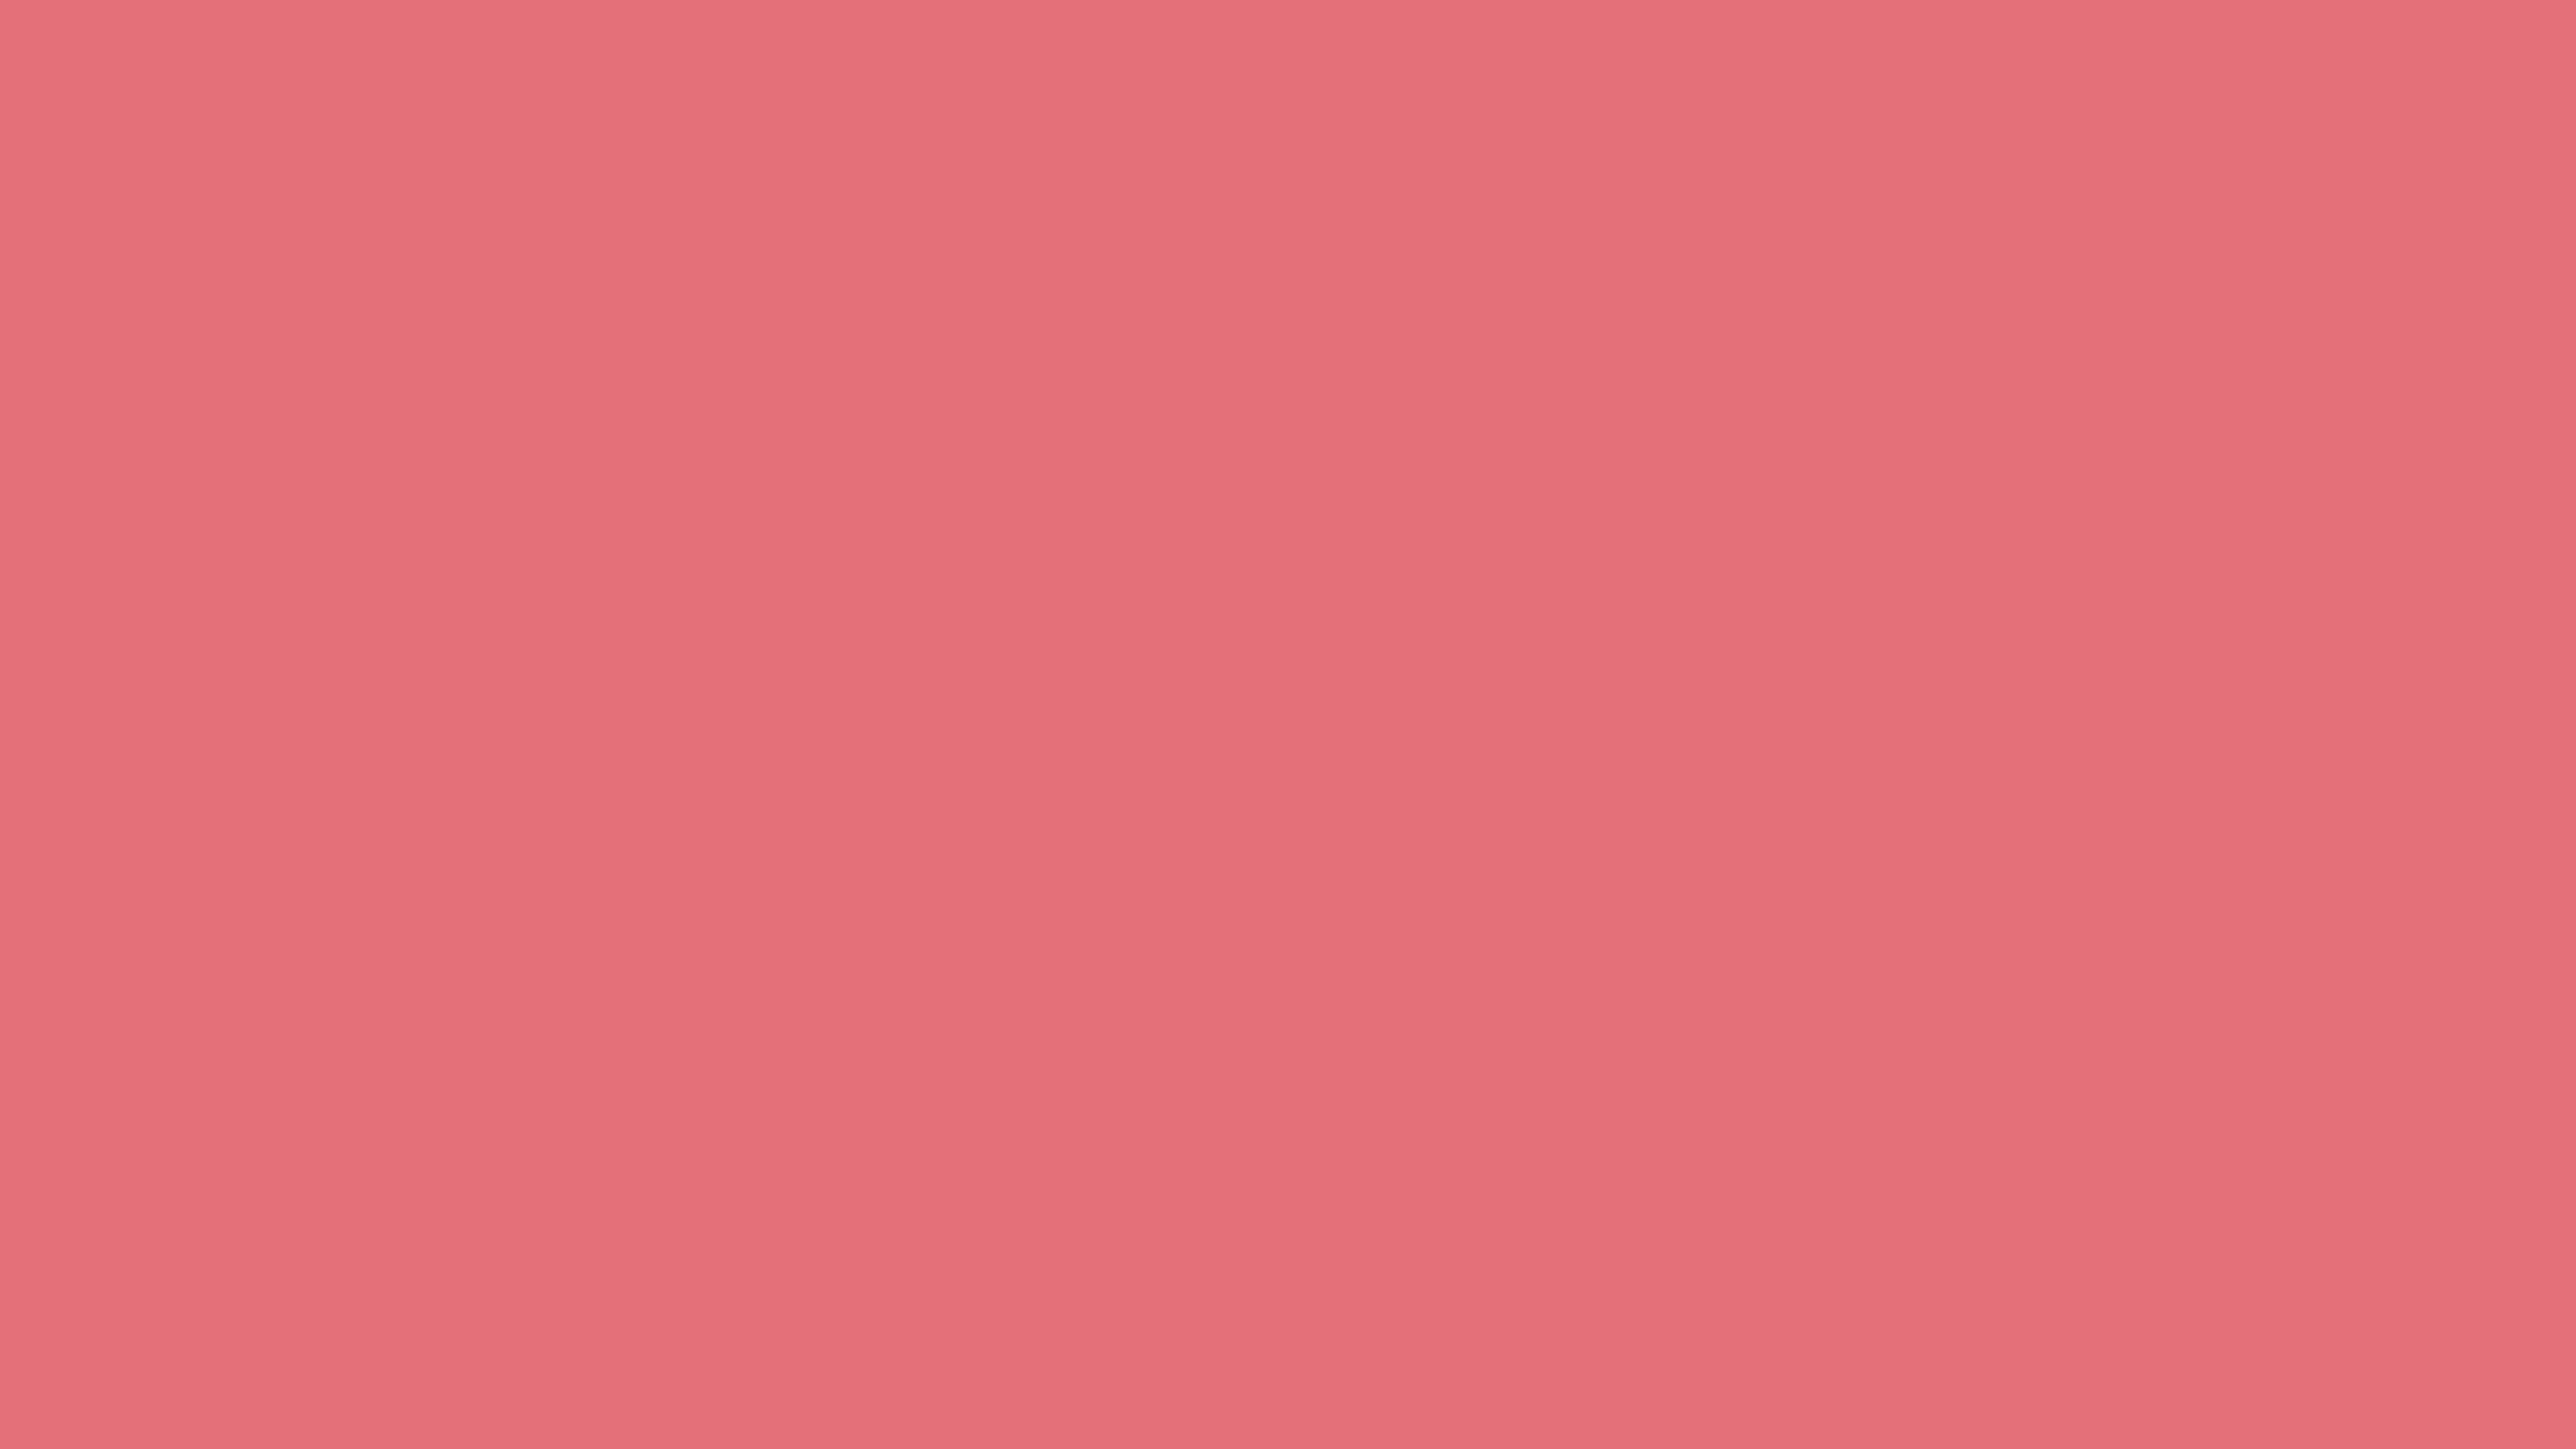 5120x2880 Tango Pink Solid Color Background